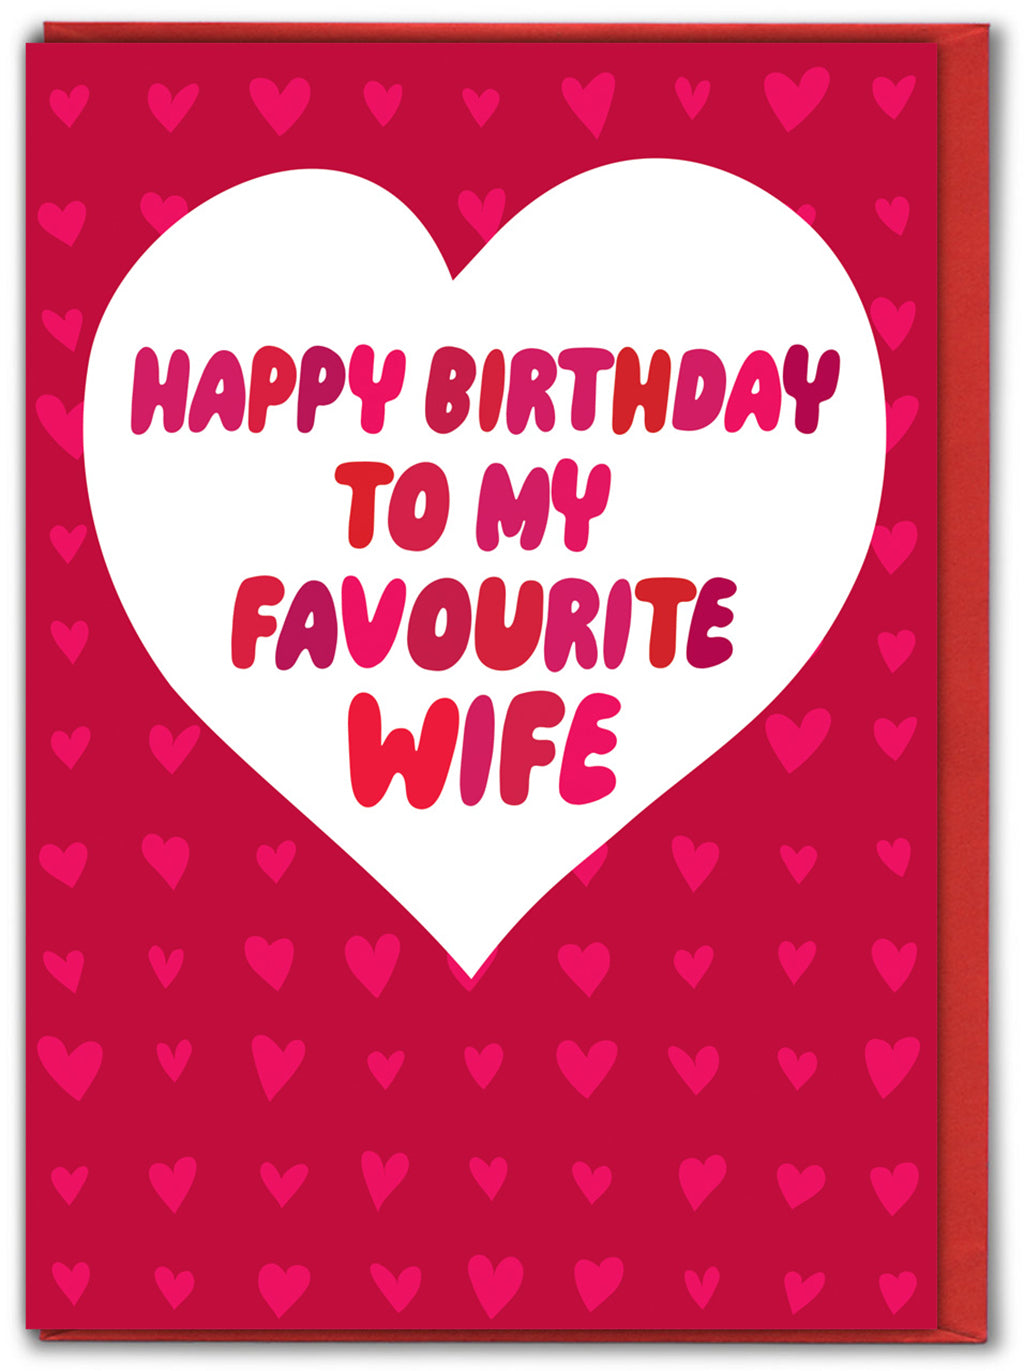 Favourite Wife Funny Birthday Card from Penny Black